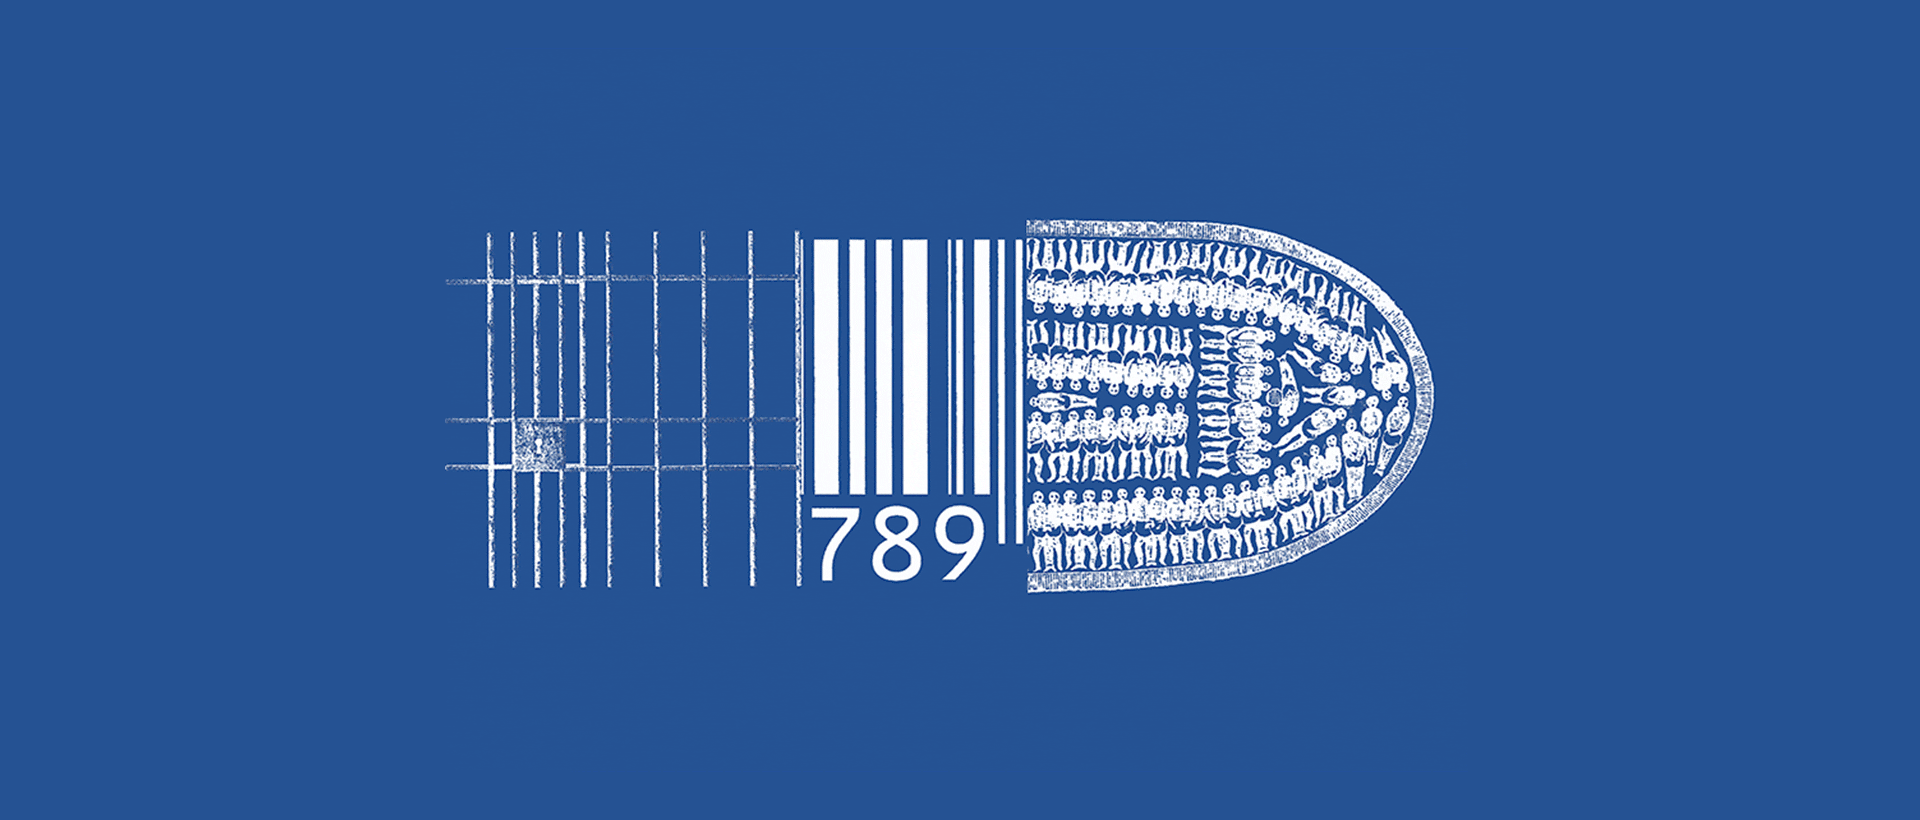 Artistic white-lined collage silhouette of a bullet shape or ship shape composed of jail cell bars, barcode, and figures of people arranged in a stacked formation over a blue background.